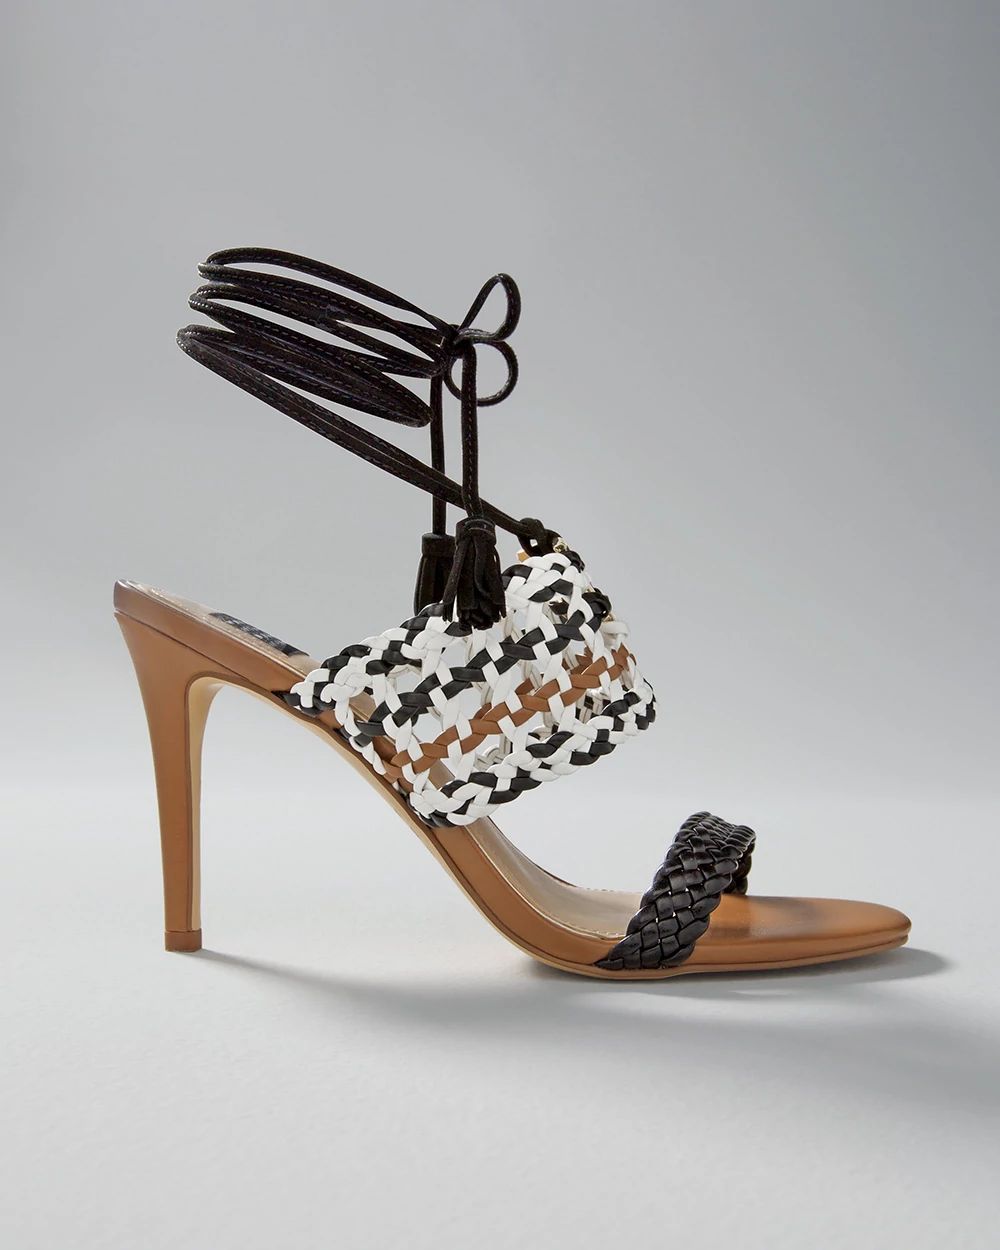 Braided Mid-Heel Gladiator Sandal click to view larger image.